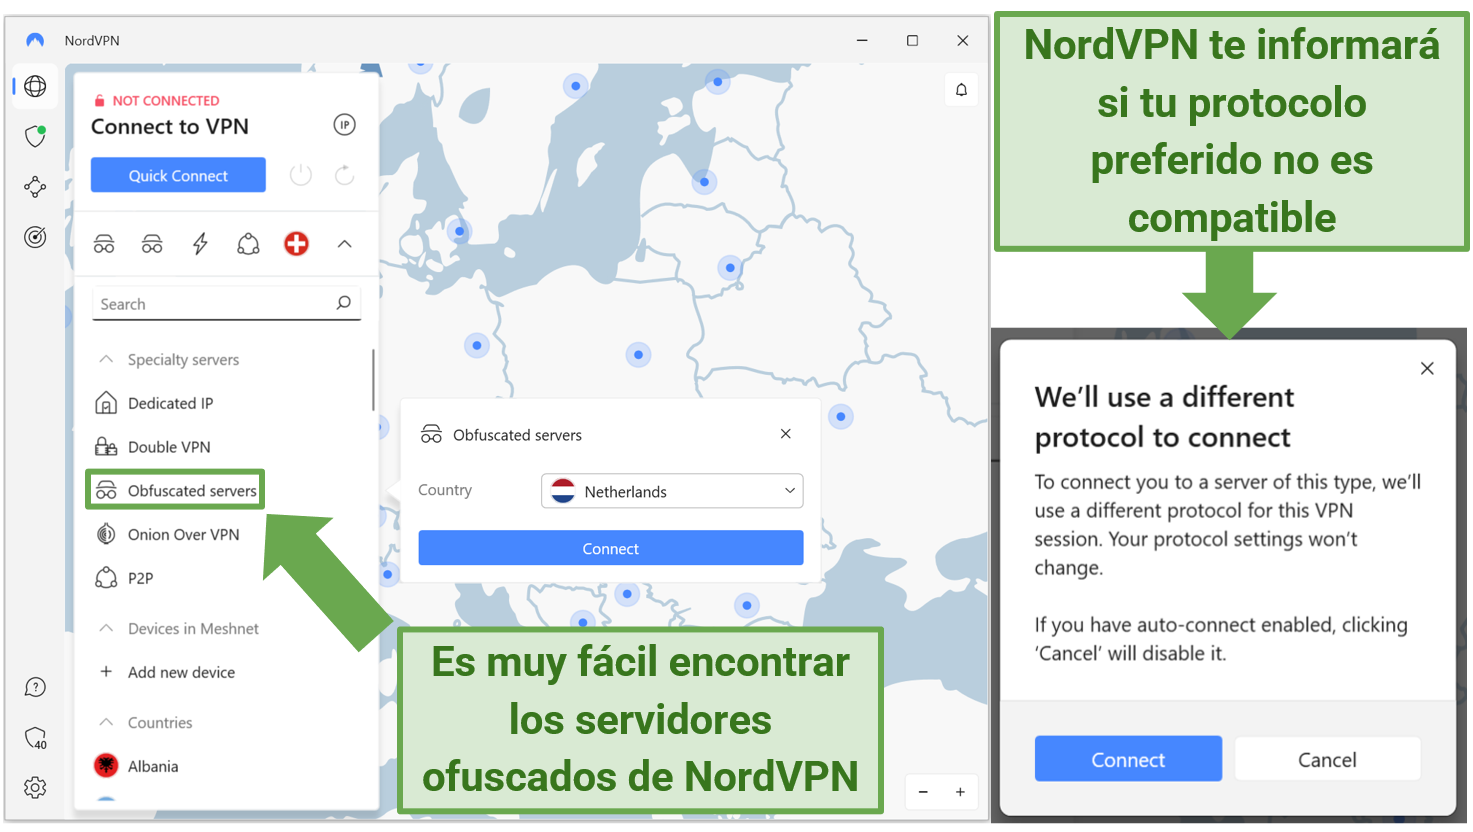 Screenshot showing how to connect to NordVPN's obfuscated servers